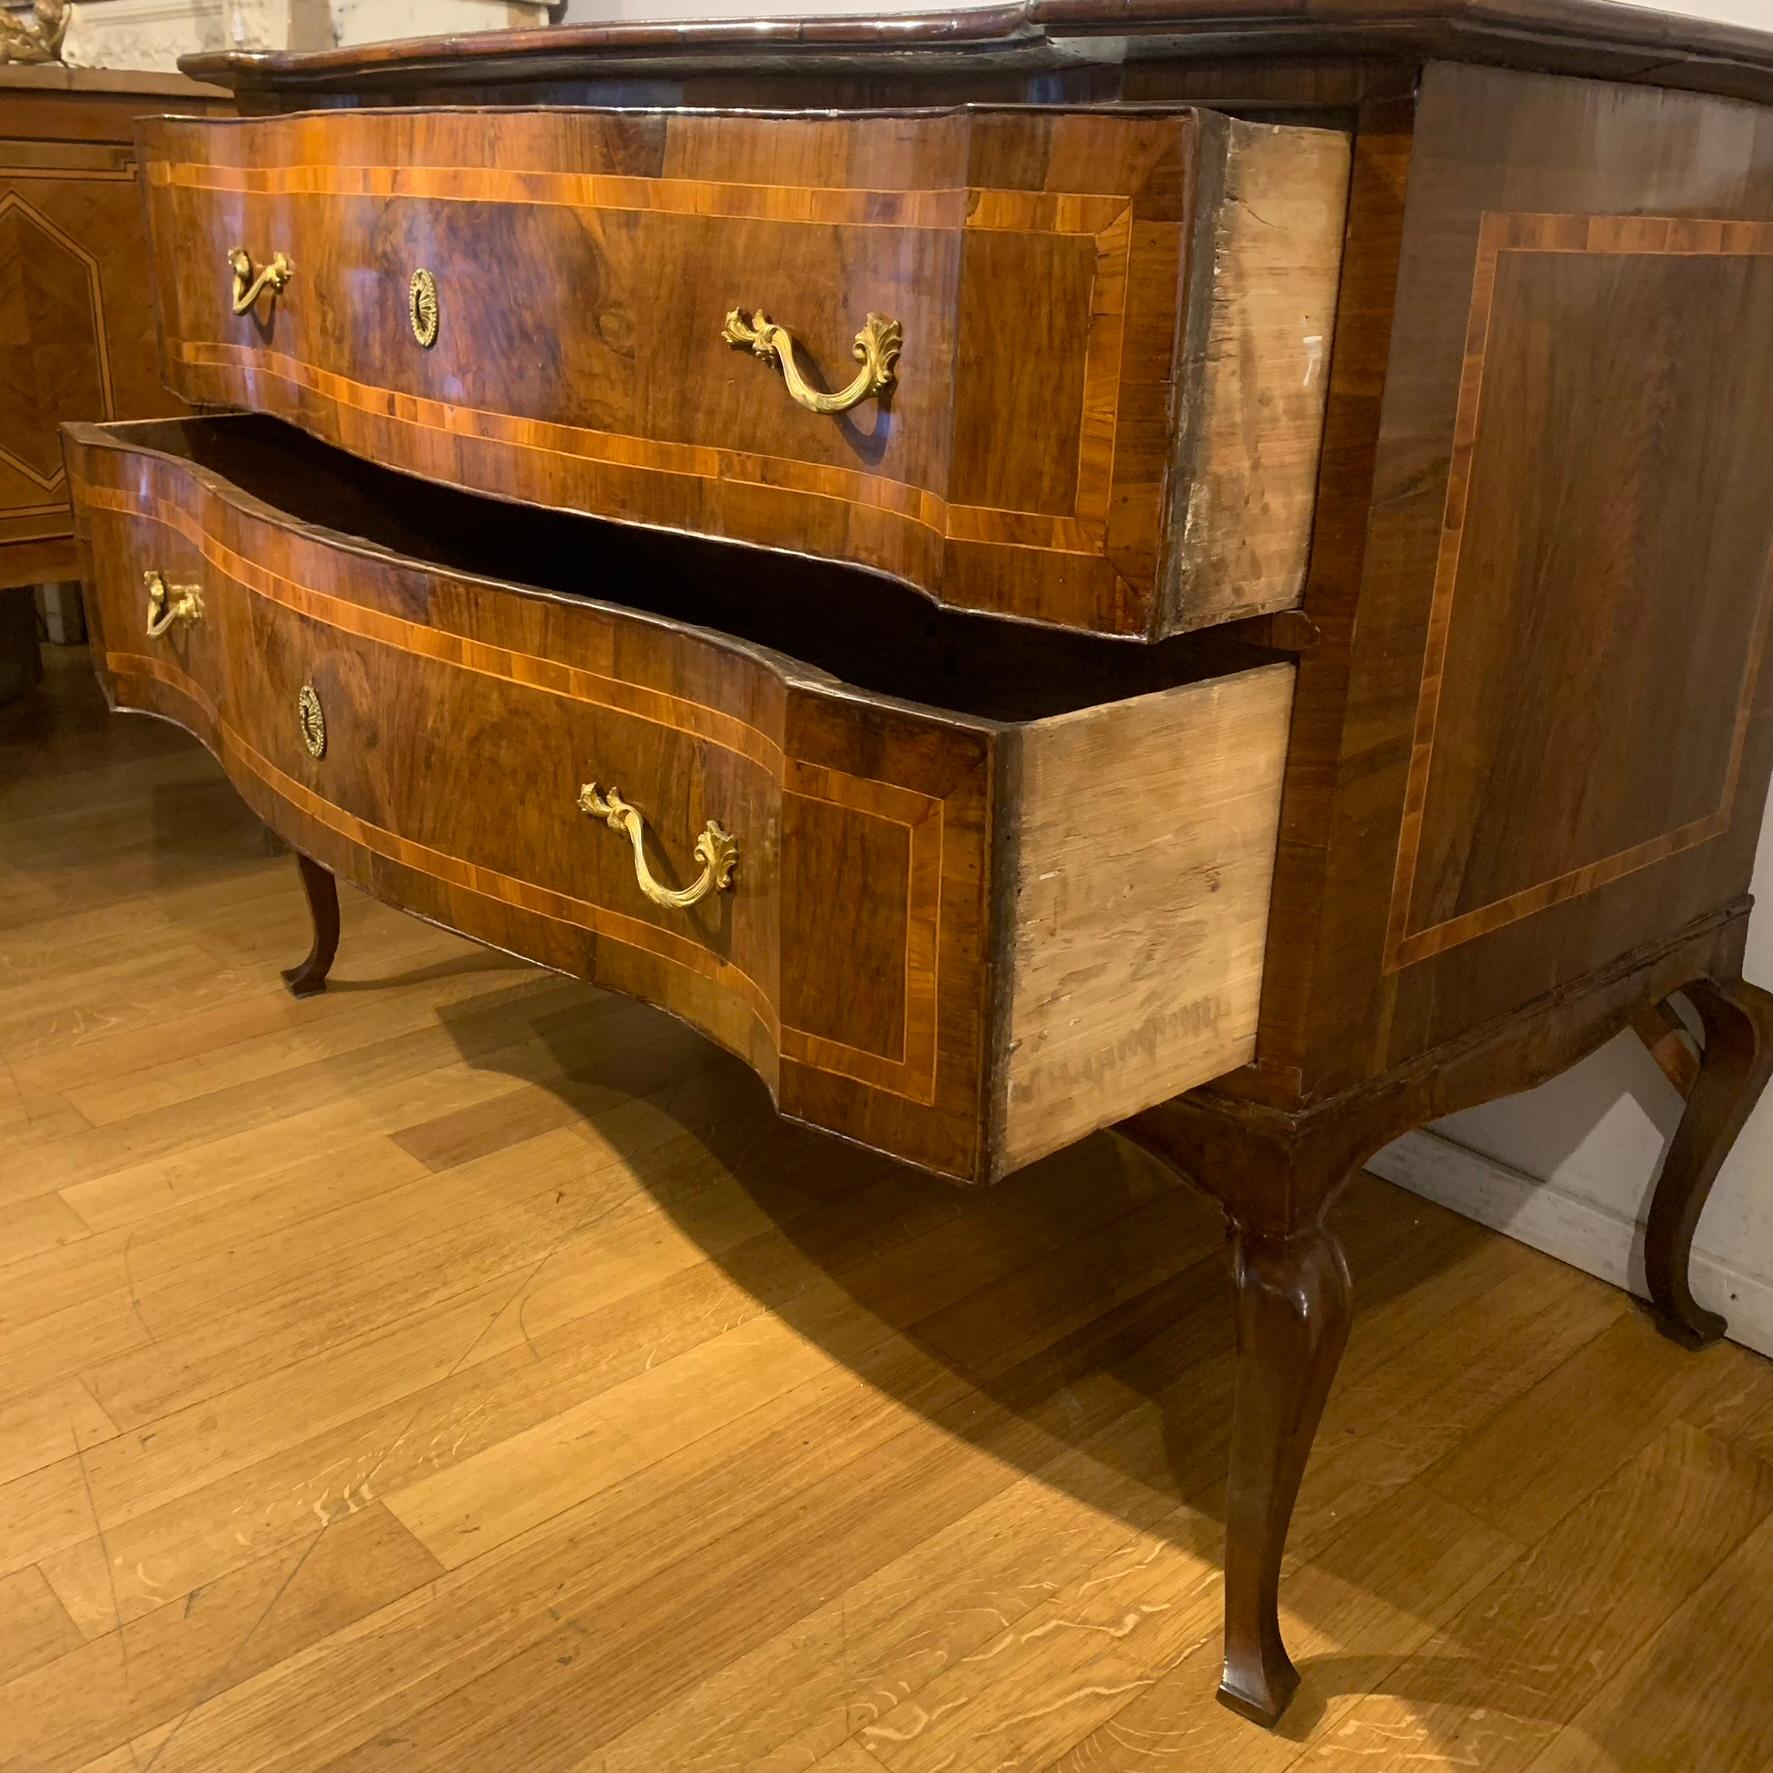 END OF THE 17th CENTURY WALNUT AND CHERRY VENEREED CHEST OF DRAWERS In Good Condition For Sale In Firenze, FI